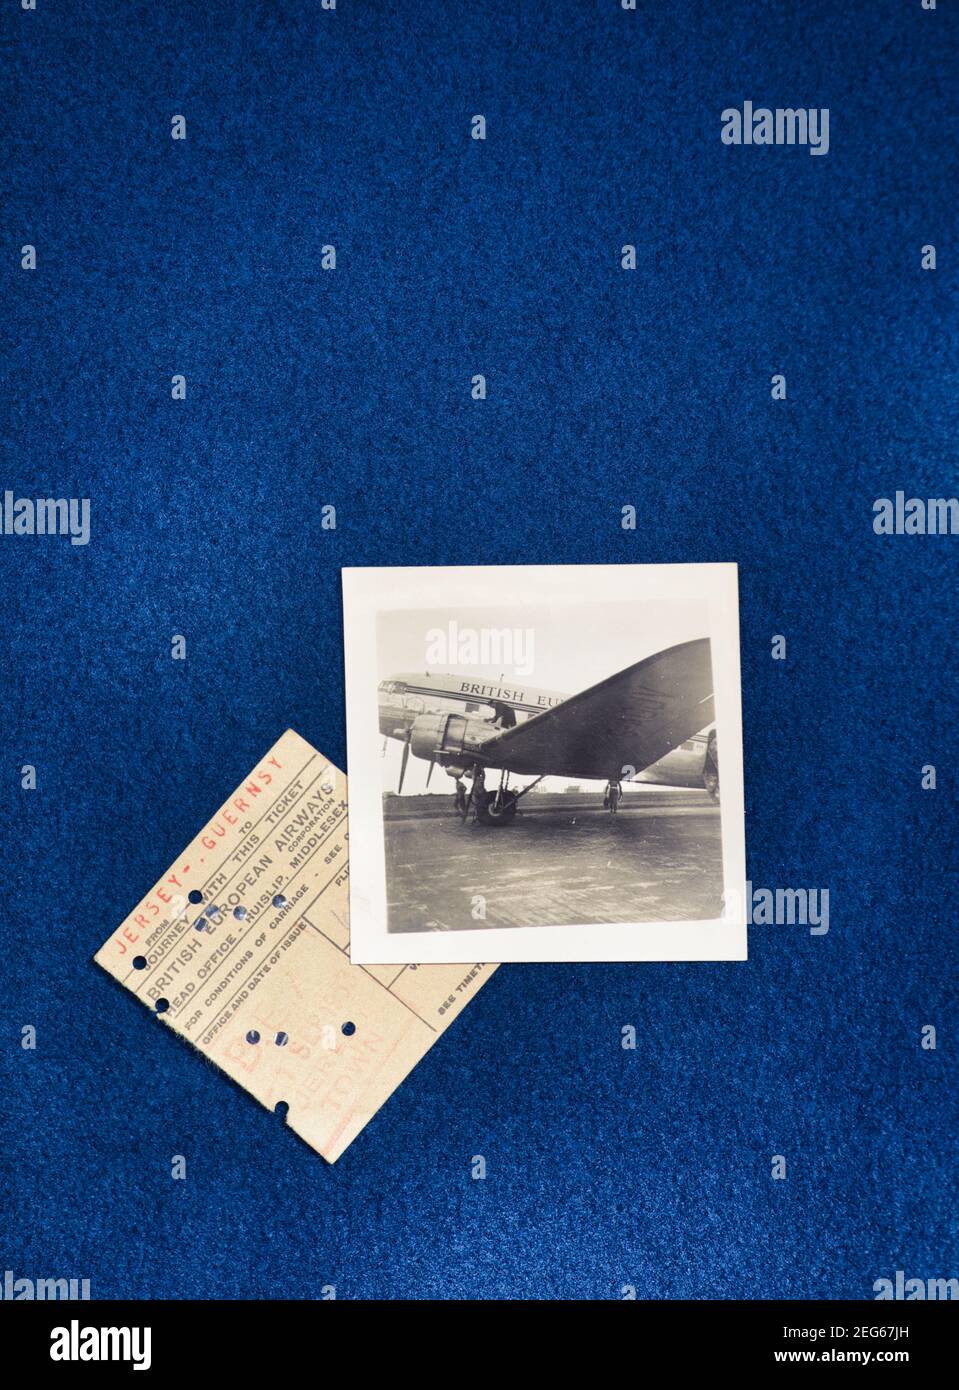 British European Airways passenger plane at Jersey airport and Jersey to Guernsey ticket from 1953. Concept nostalgia, yesteryear, reminisce Stock Photo